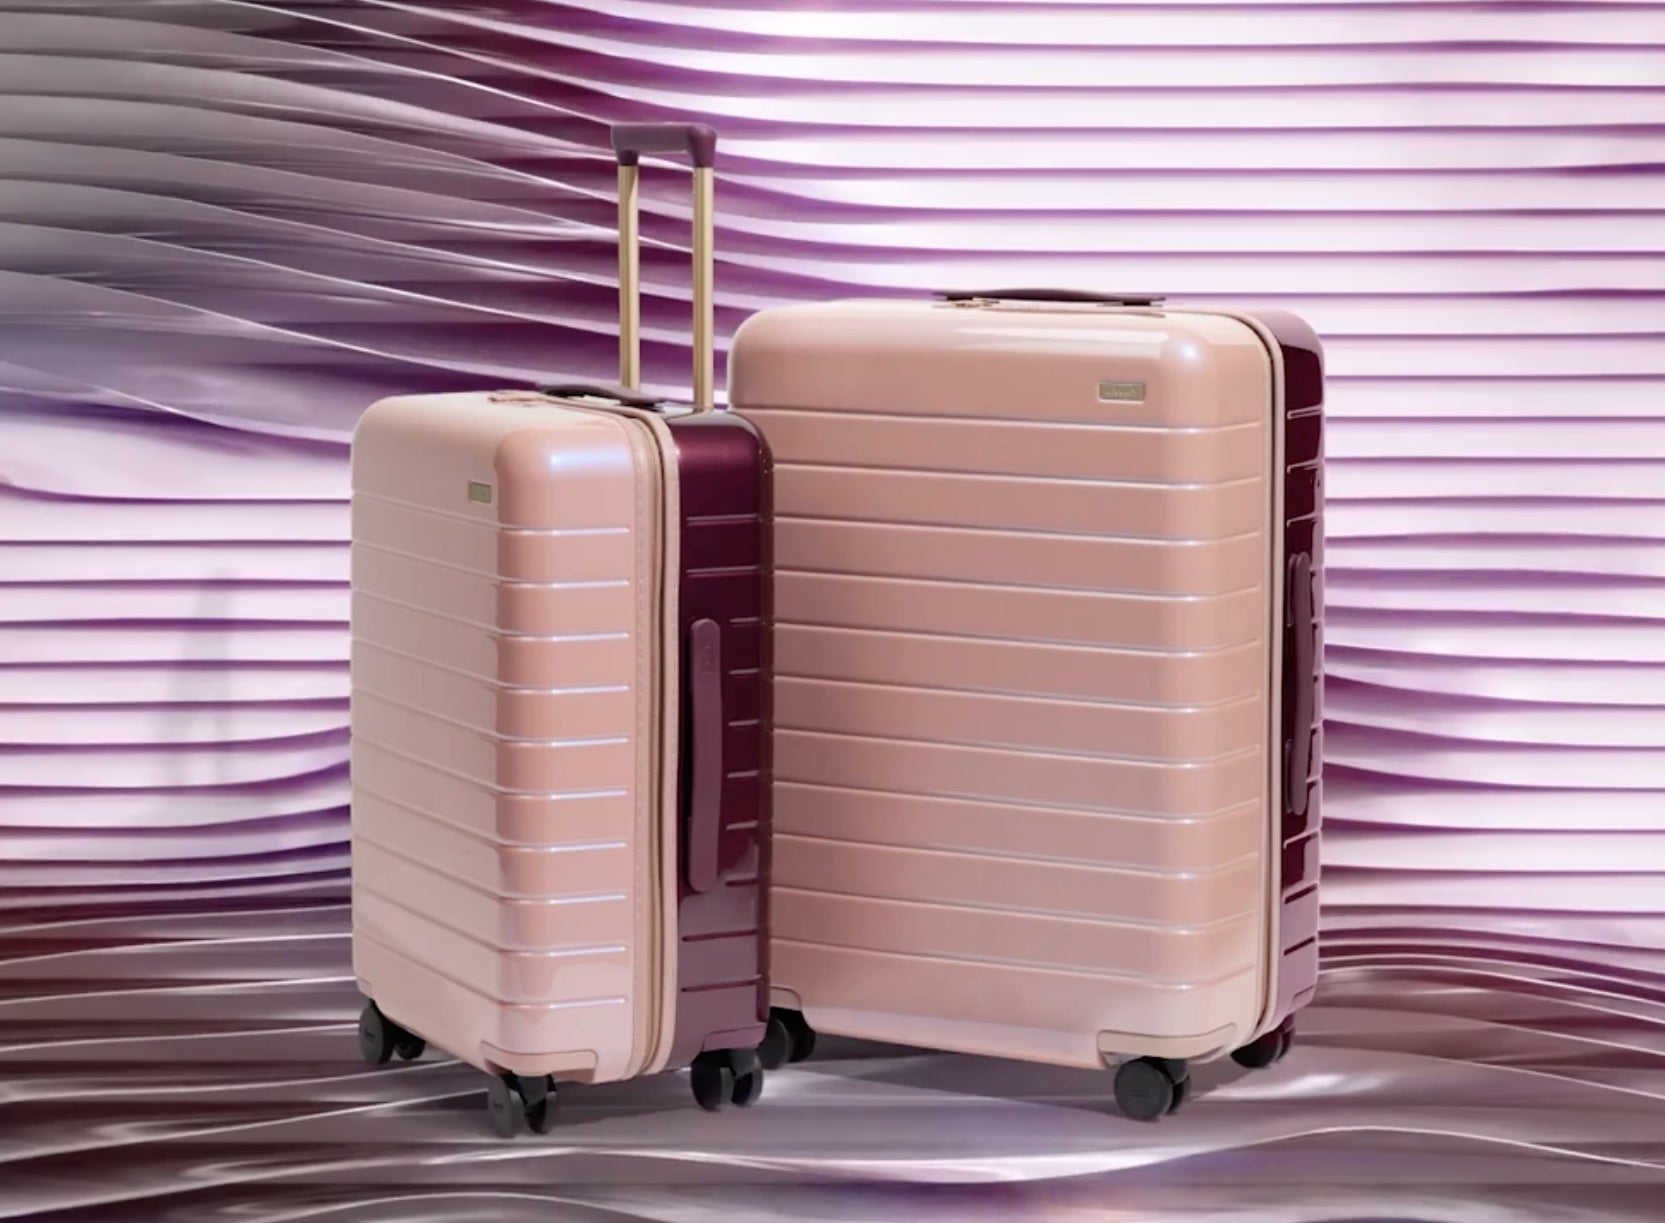 Away launches new Holiday Collection luggage